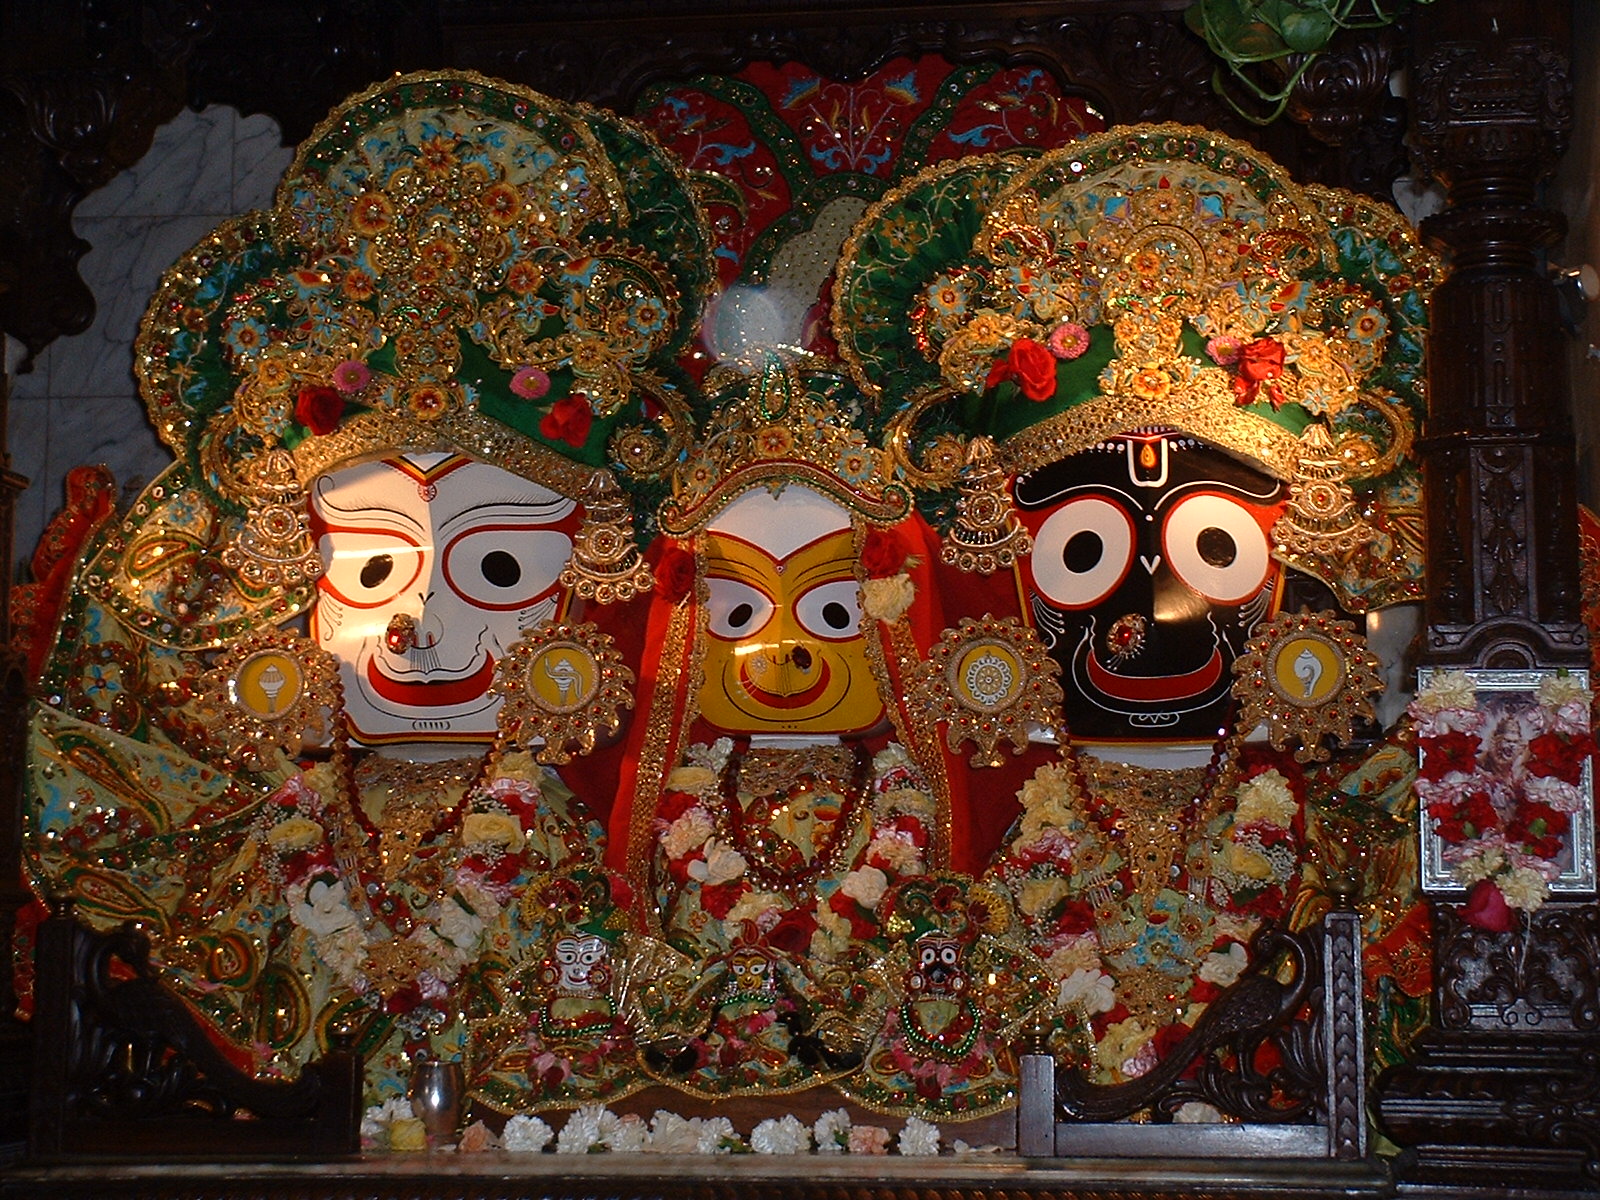  Lord Jagannath is on the right, with his sister Subhadra in the middle and his brother Balabhadra on the left